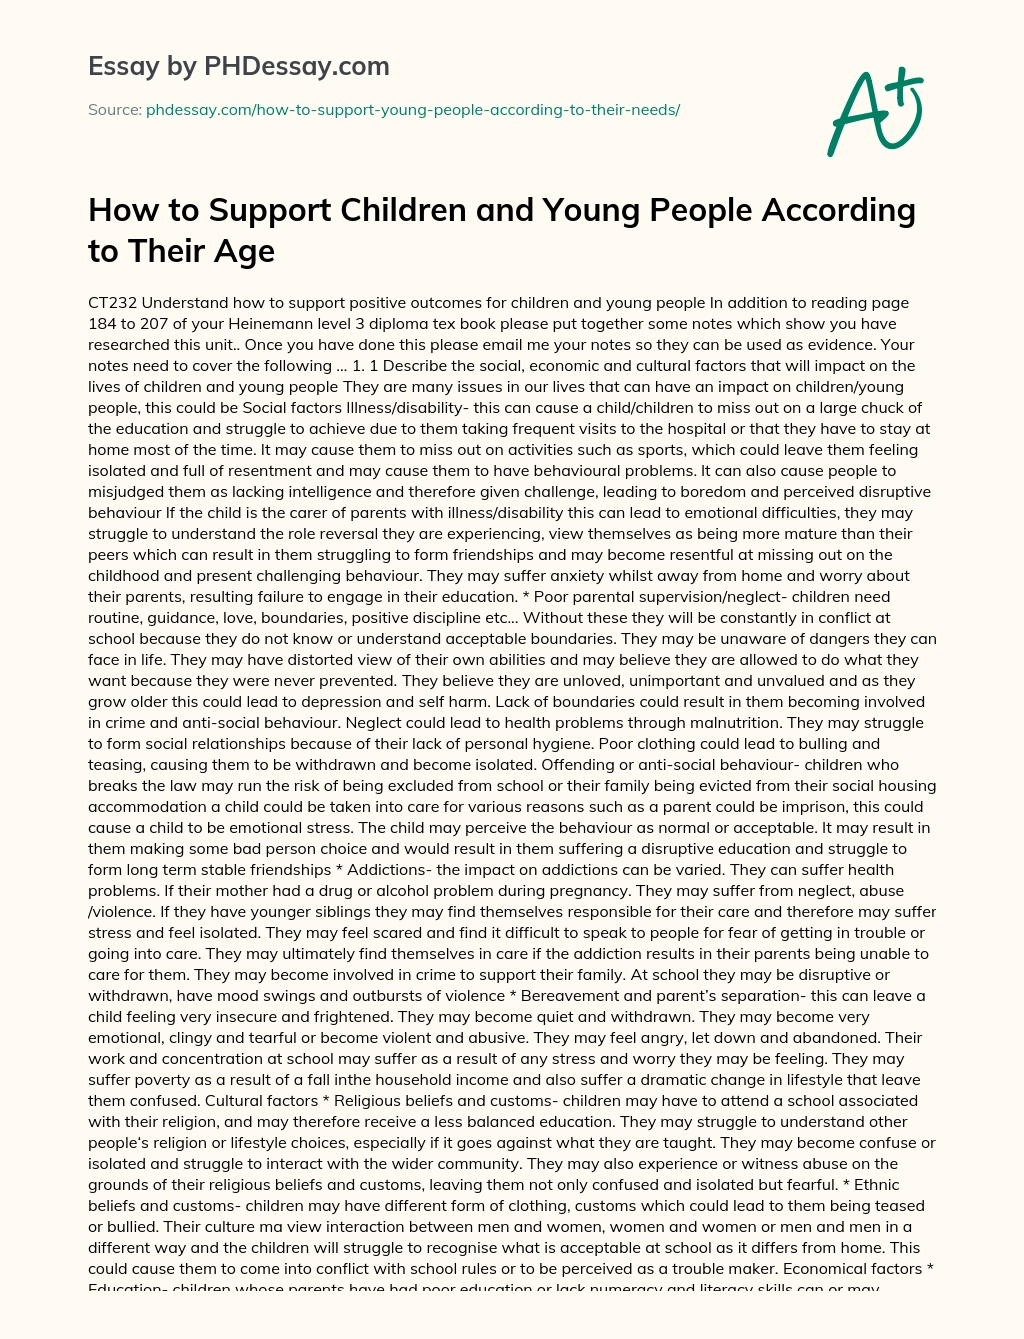 How to Support Children and Young People According to Their Age essay